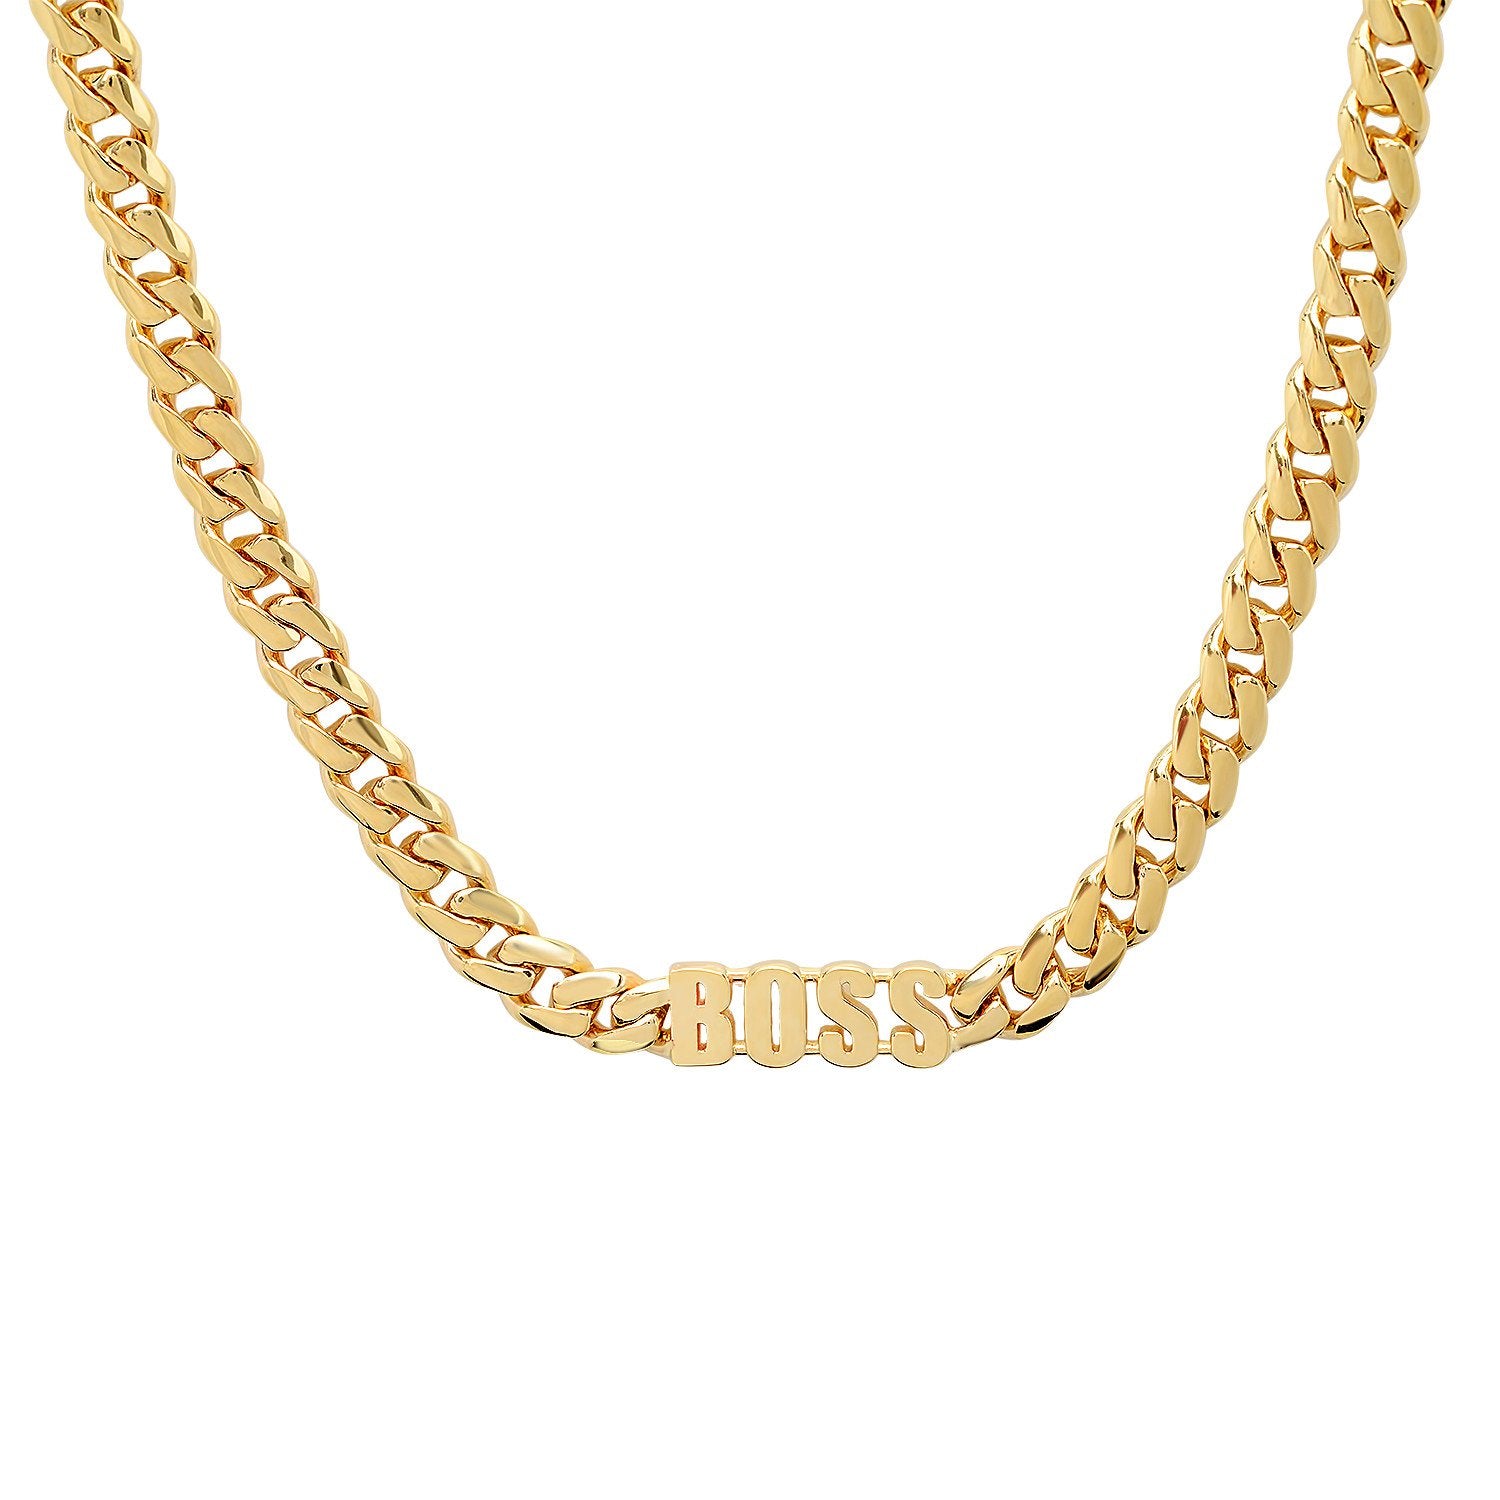 Boss Necklace, Heavy Chain